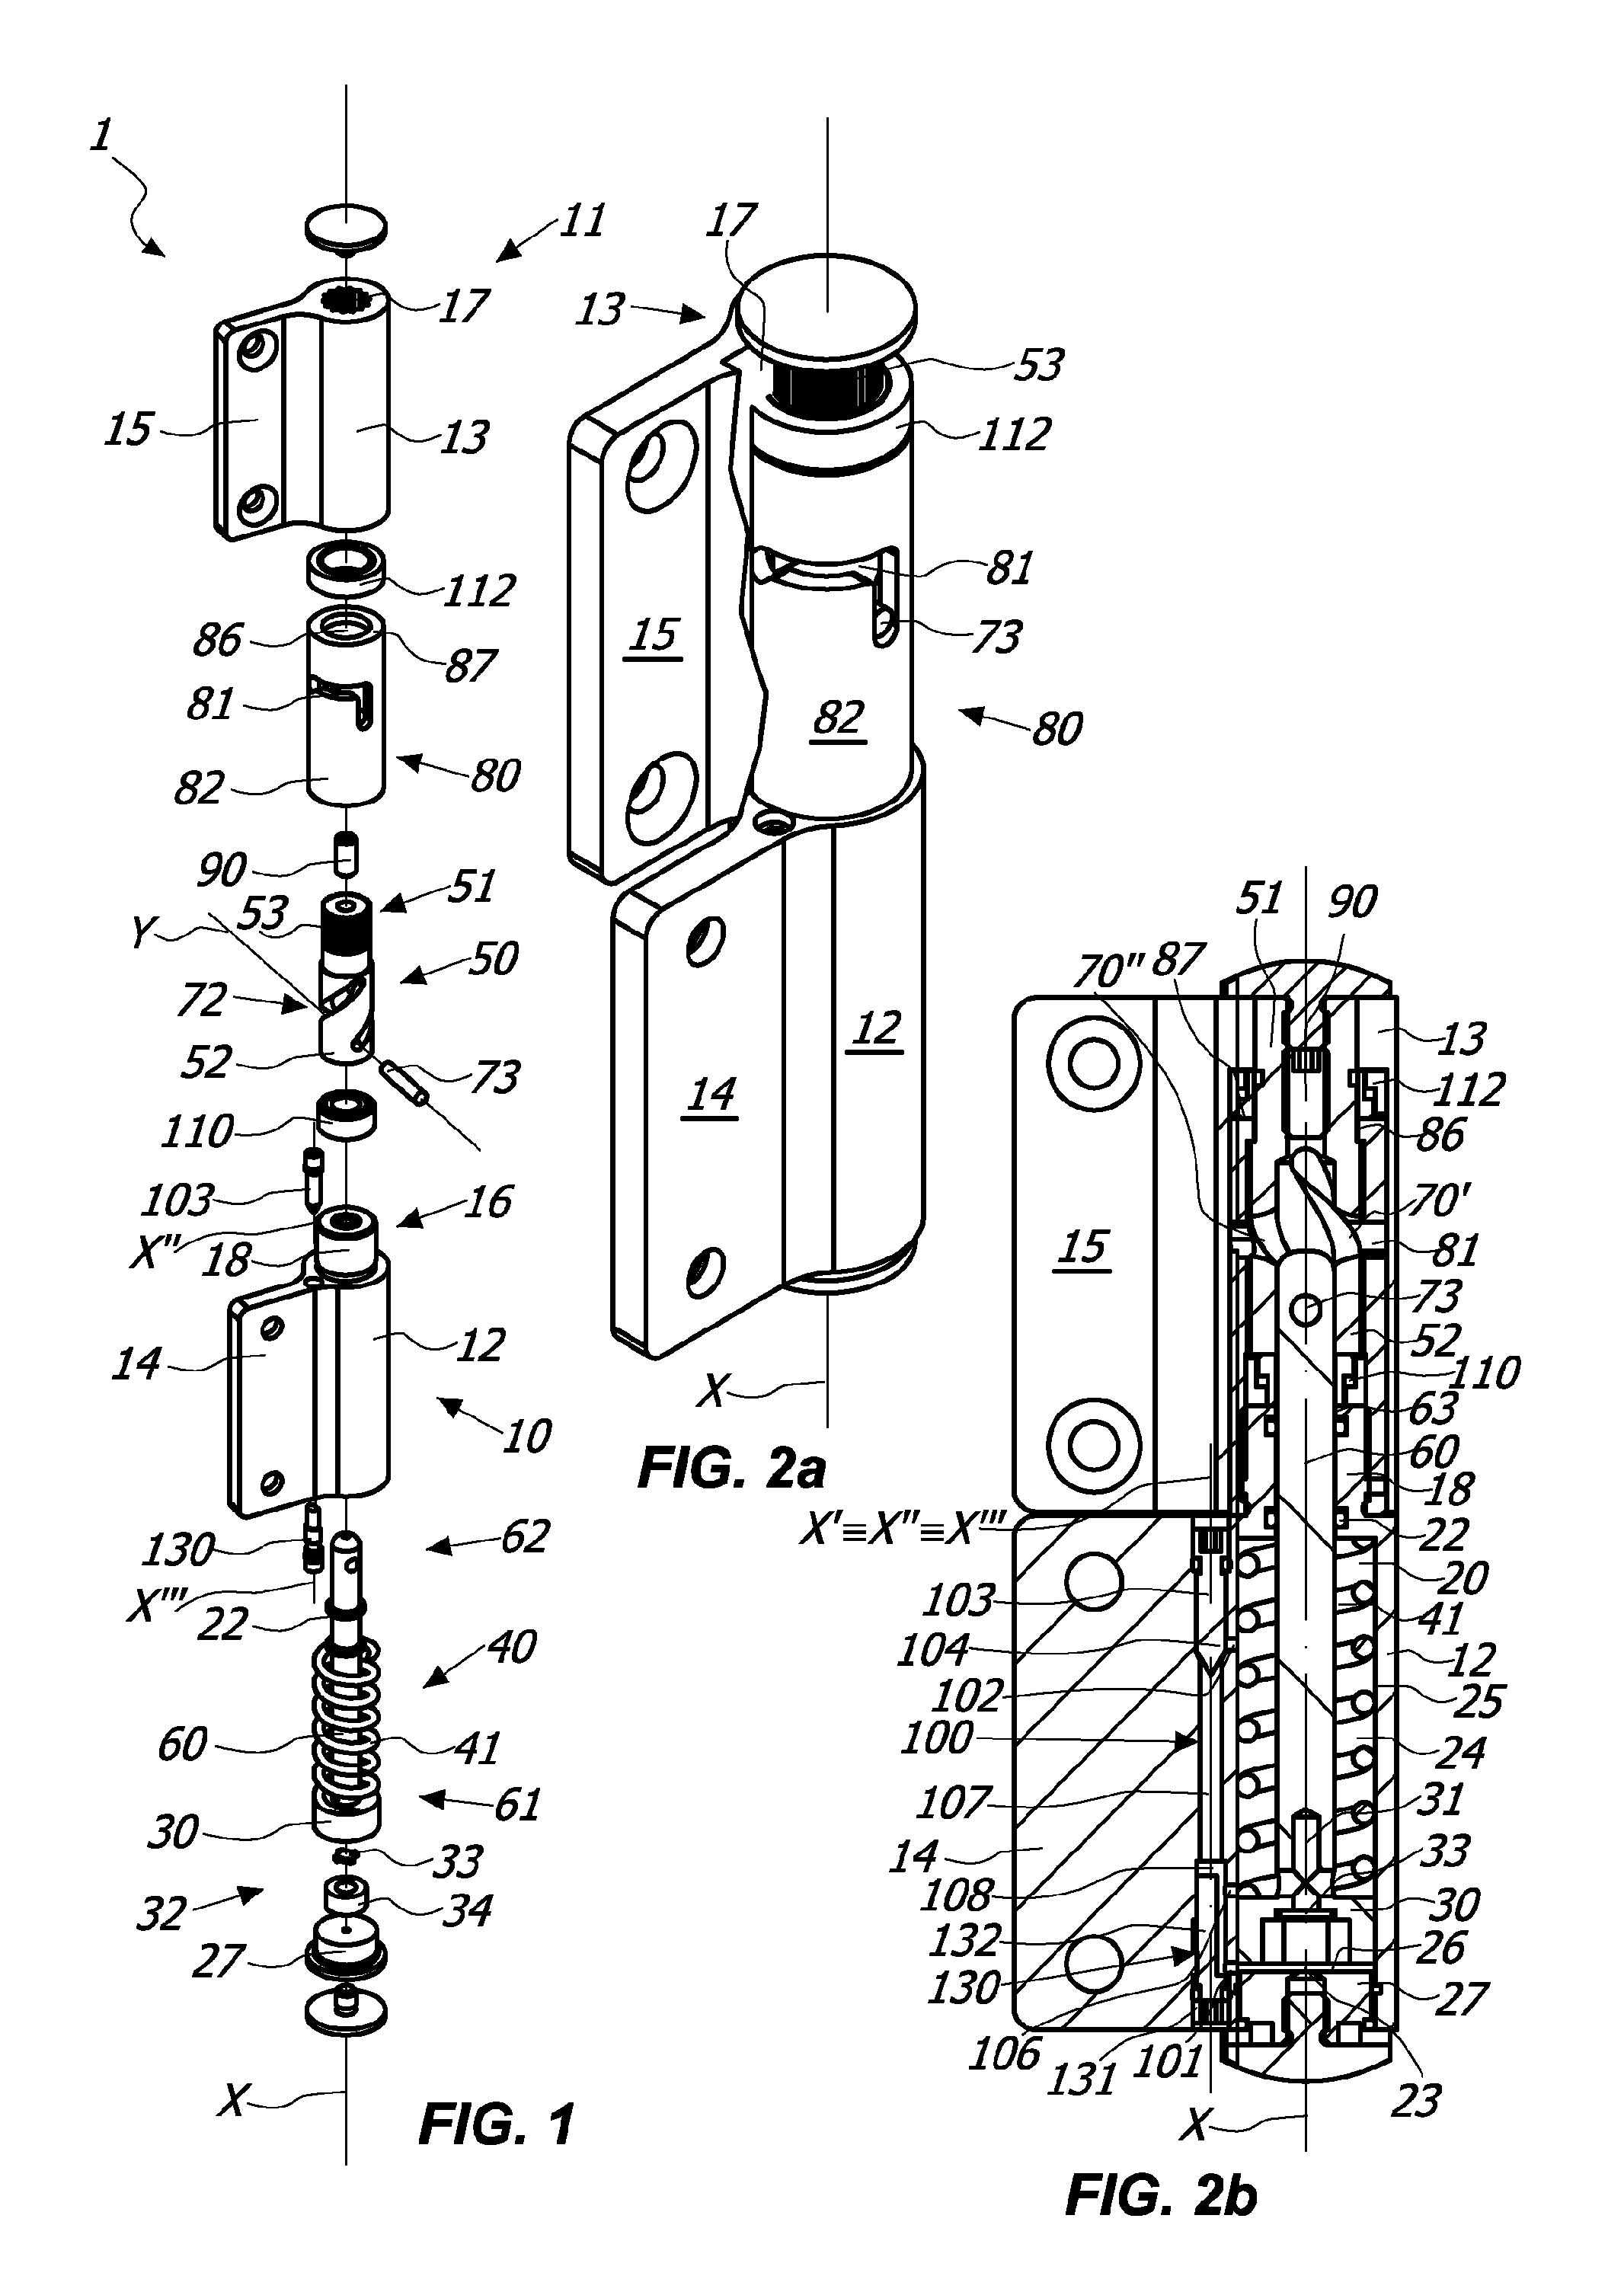 Hinge device for doors, shutters and the like